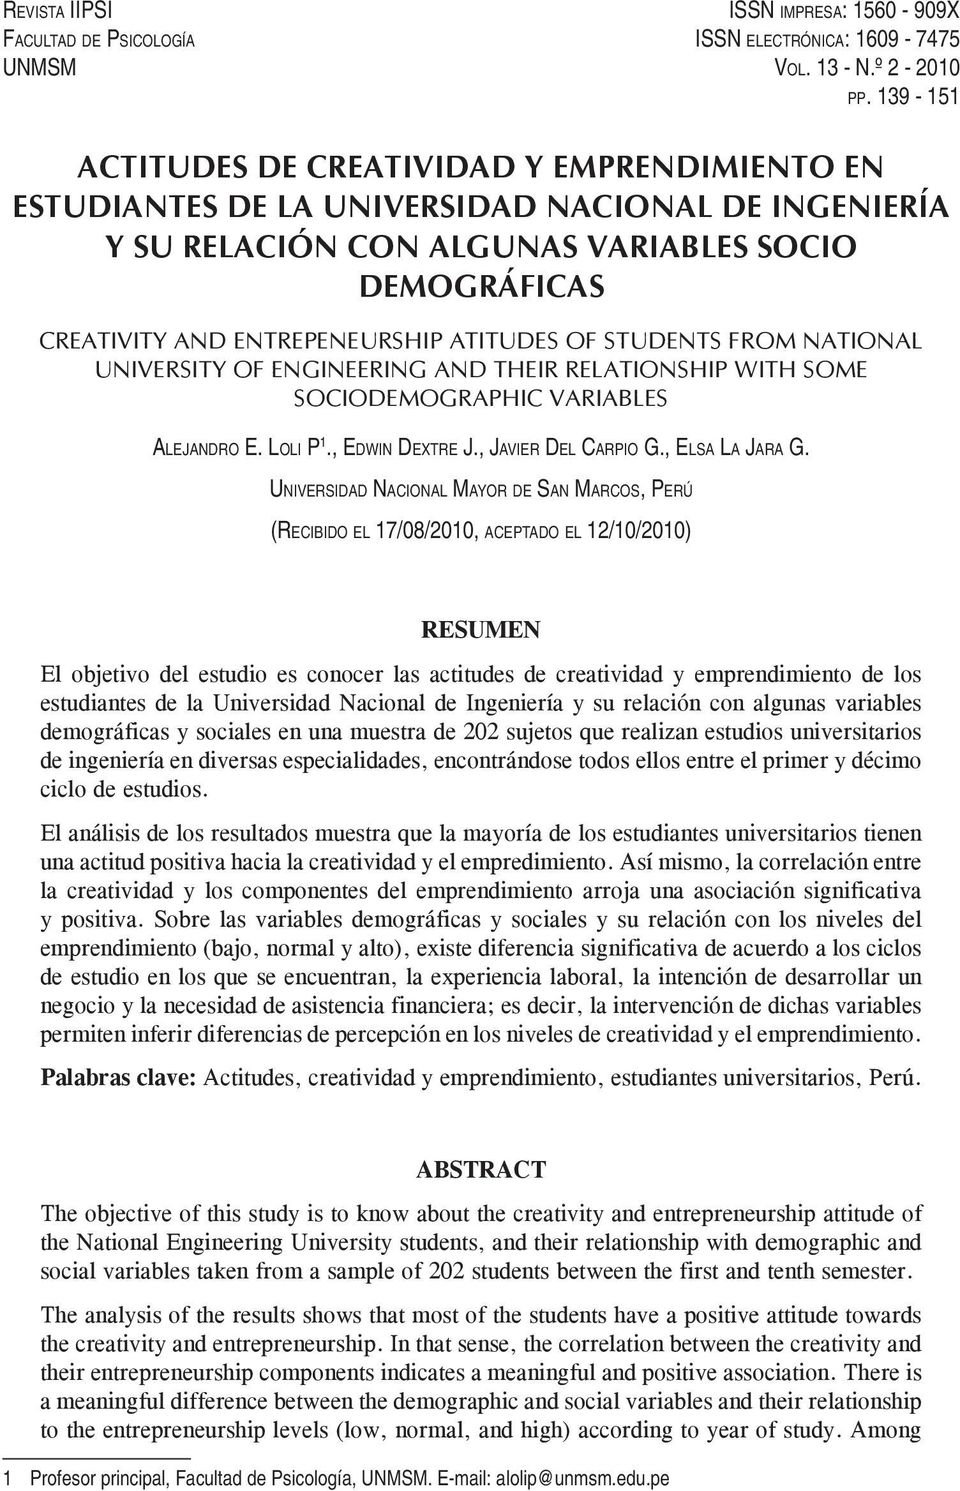 ATITUDES OF STUDENTS FROM NATIONAL UNIVERSITY OF ENGINEERING AND THEIR RELATIONSHIP WITH SOME SOCIODEMOGRAPHIC VARIABLES ALEJANDRO E. LOLI P 1., EDWIN DEXTRE J., JAVIER DEL CARPIO G., ELSA LA JARA G.